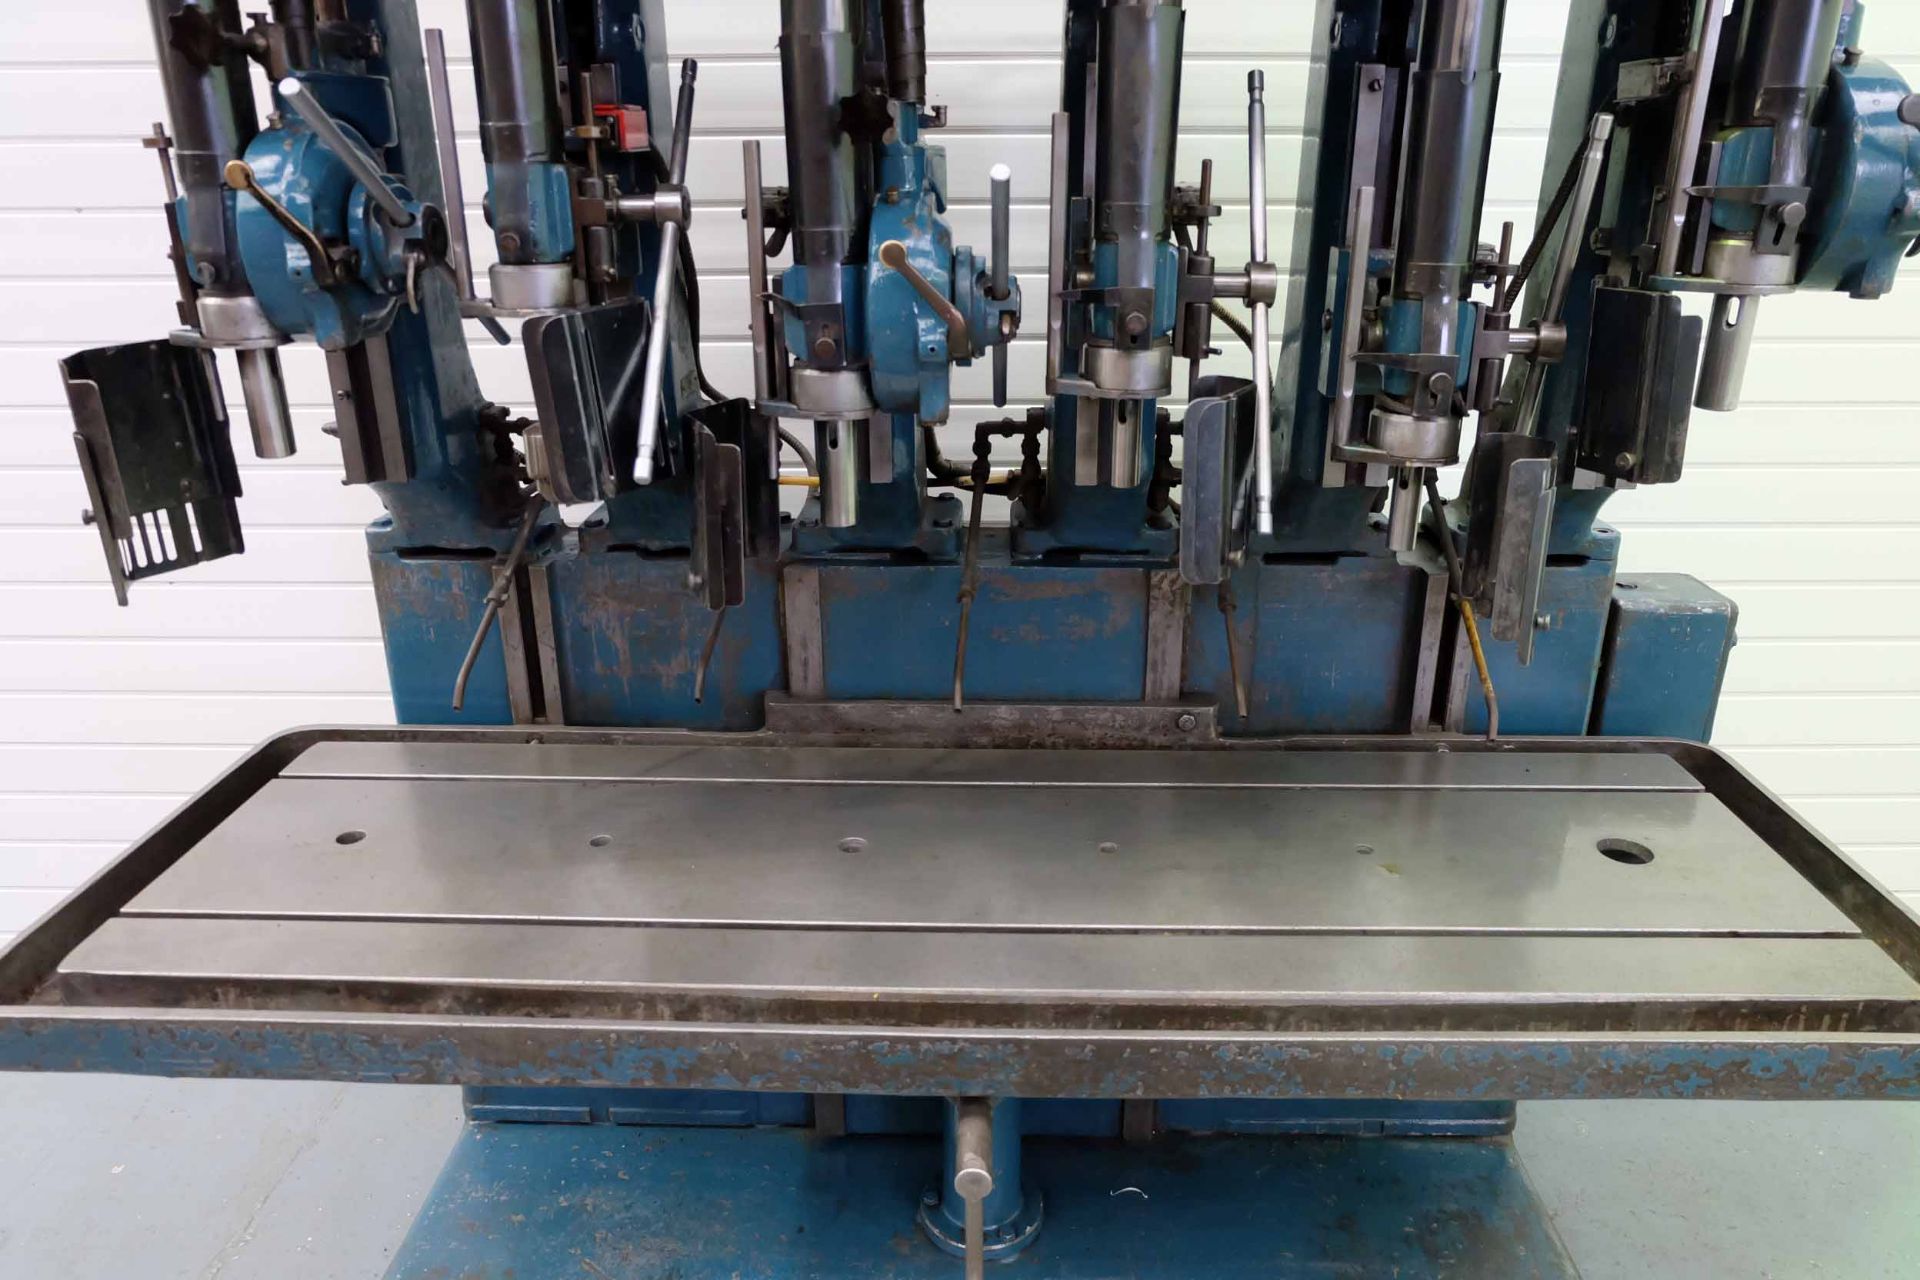 Herbert 6 Spindle In-Line Drilling Machine. 3 x Spindles 3MT With Power feed. 3 x Spindles 2MT With - Image 8 of 18